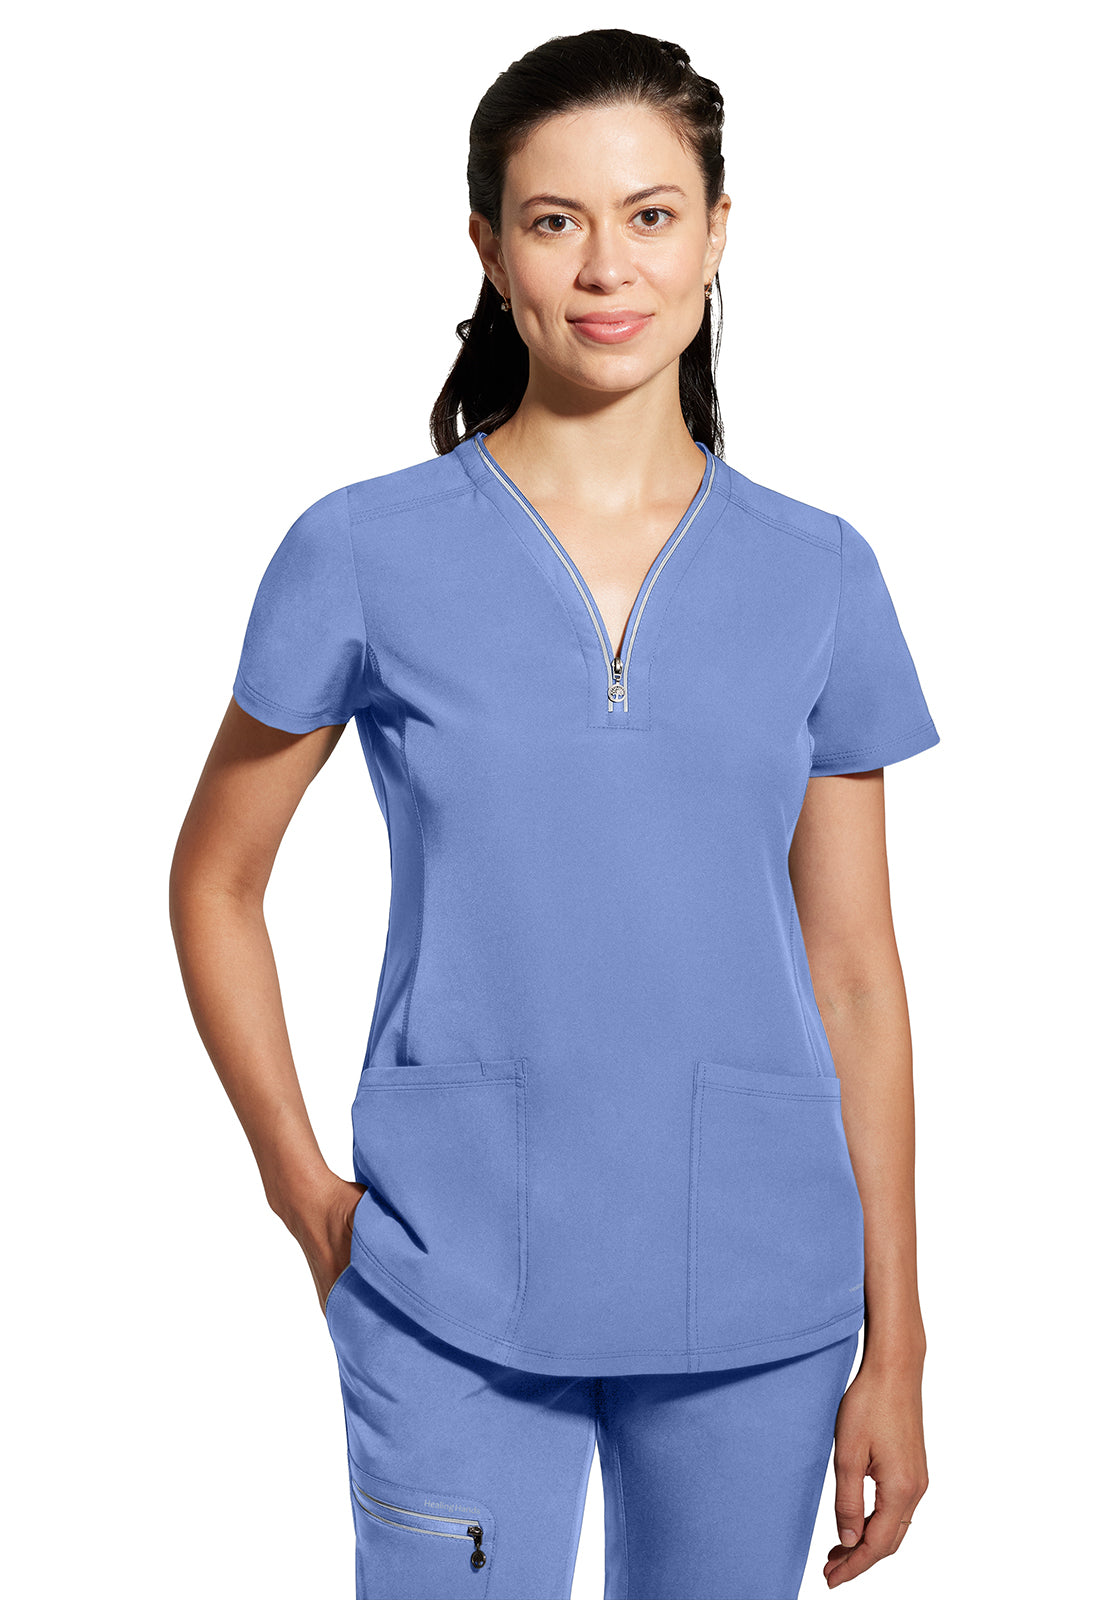 Healing Hands 360 Sonia Top (6 Colors up to 2XL)